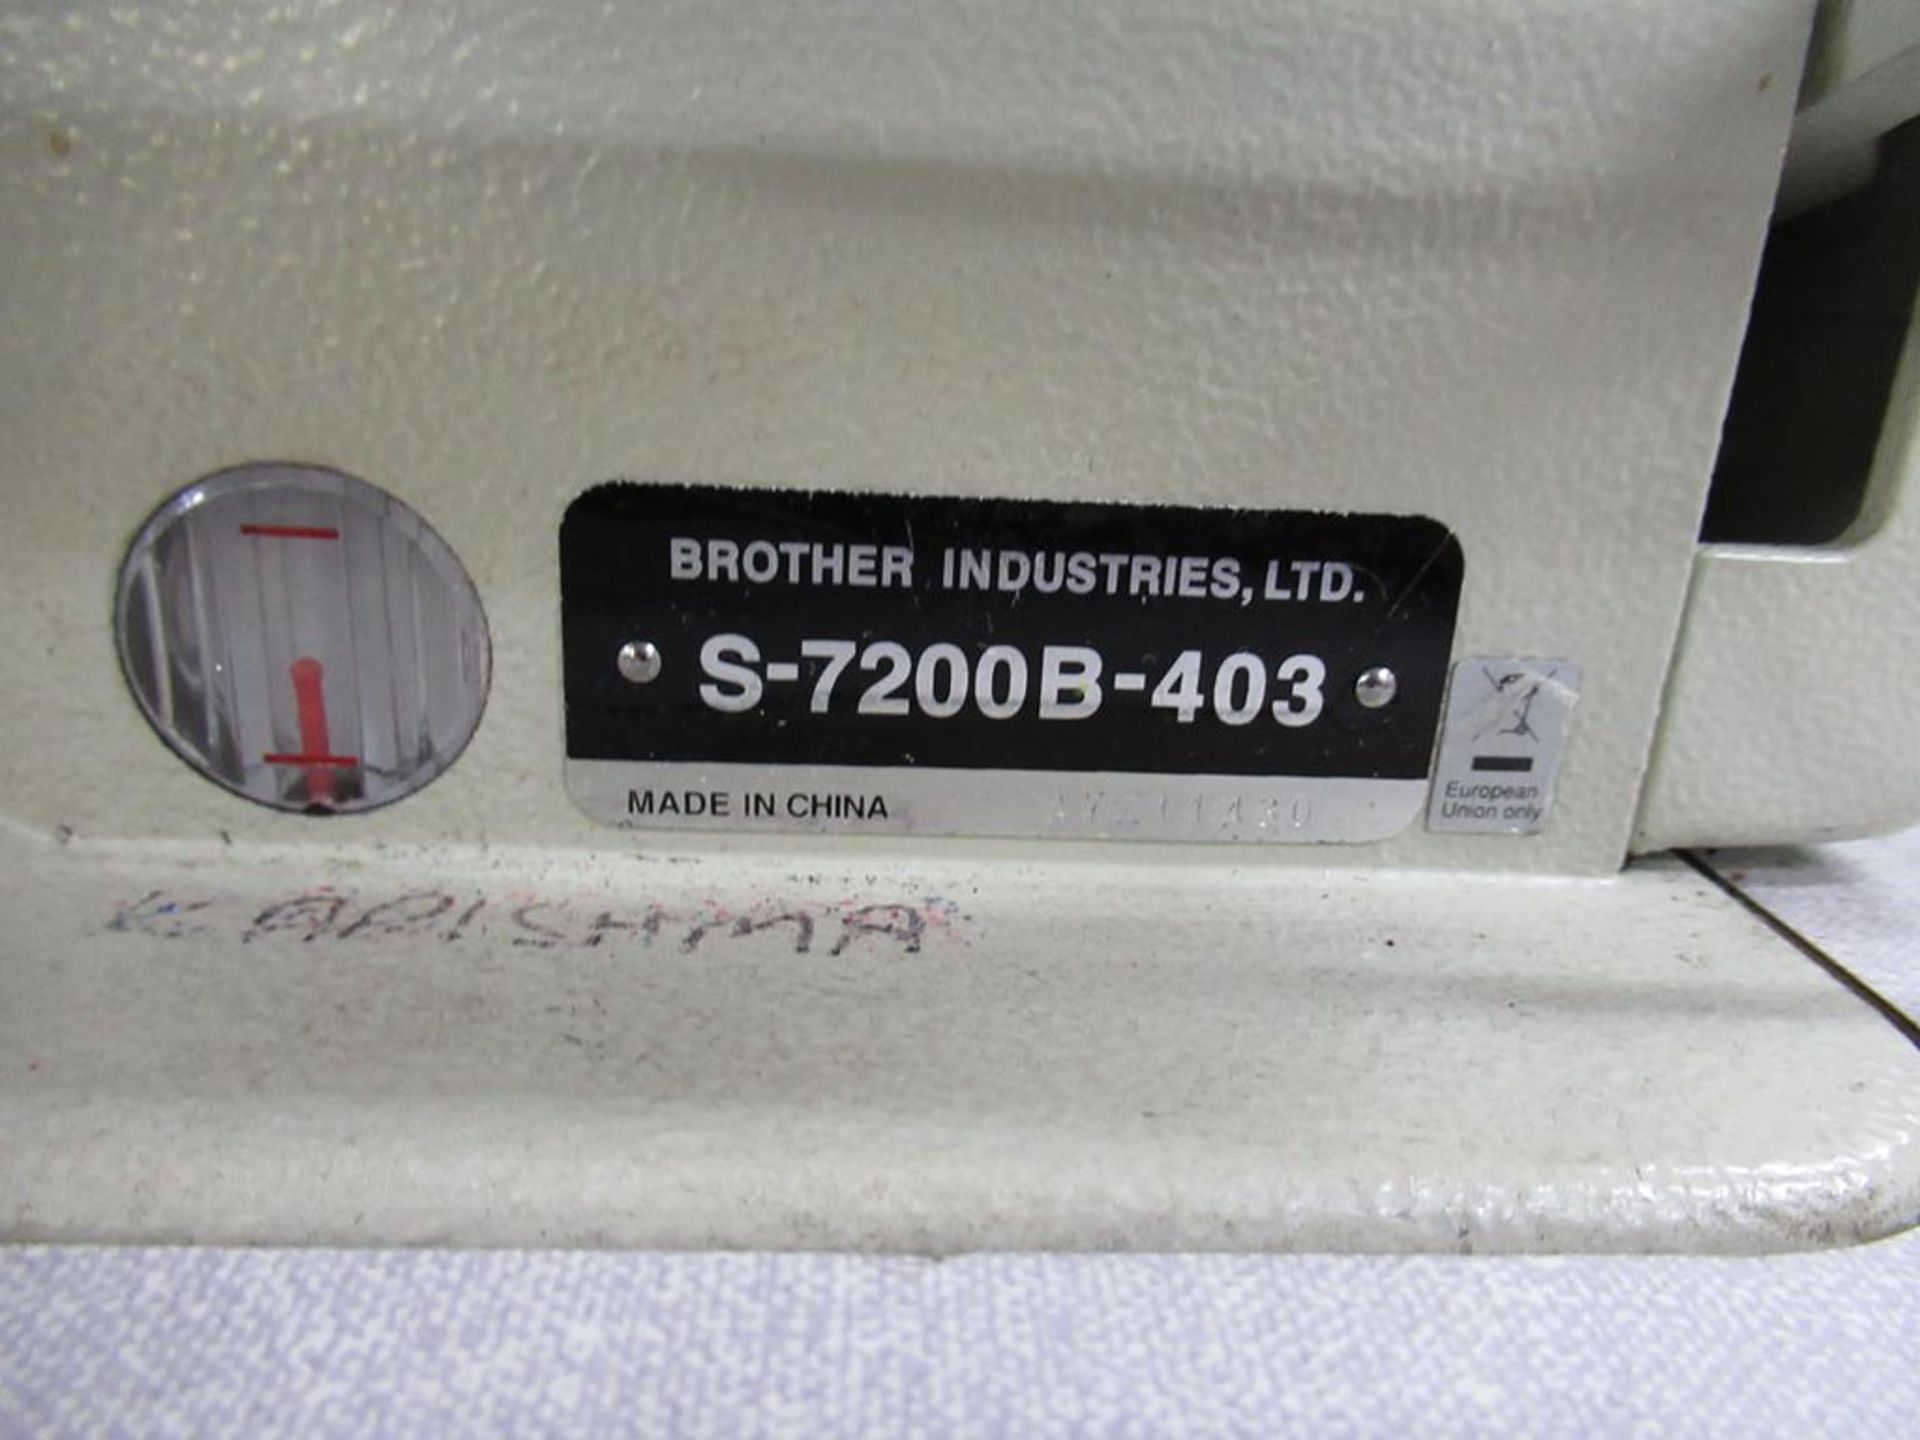 A Brother S-7200B- 403 Single Needle Direct Drive Straight Stitch Sewing Machine with Electronic Fee - Image 3 of 5